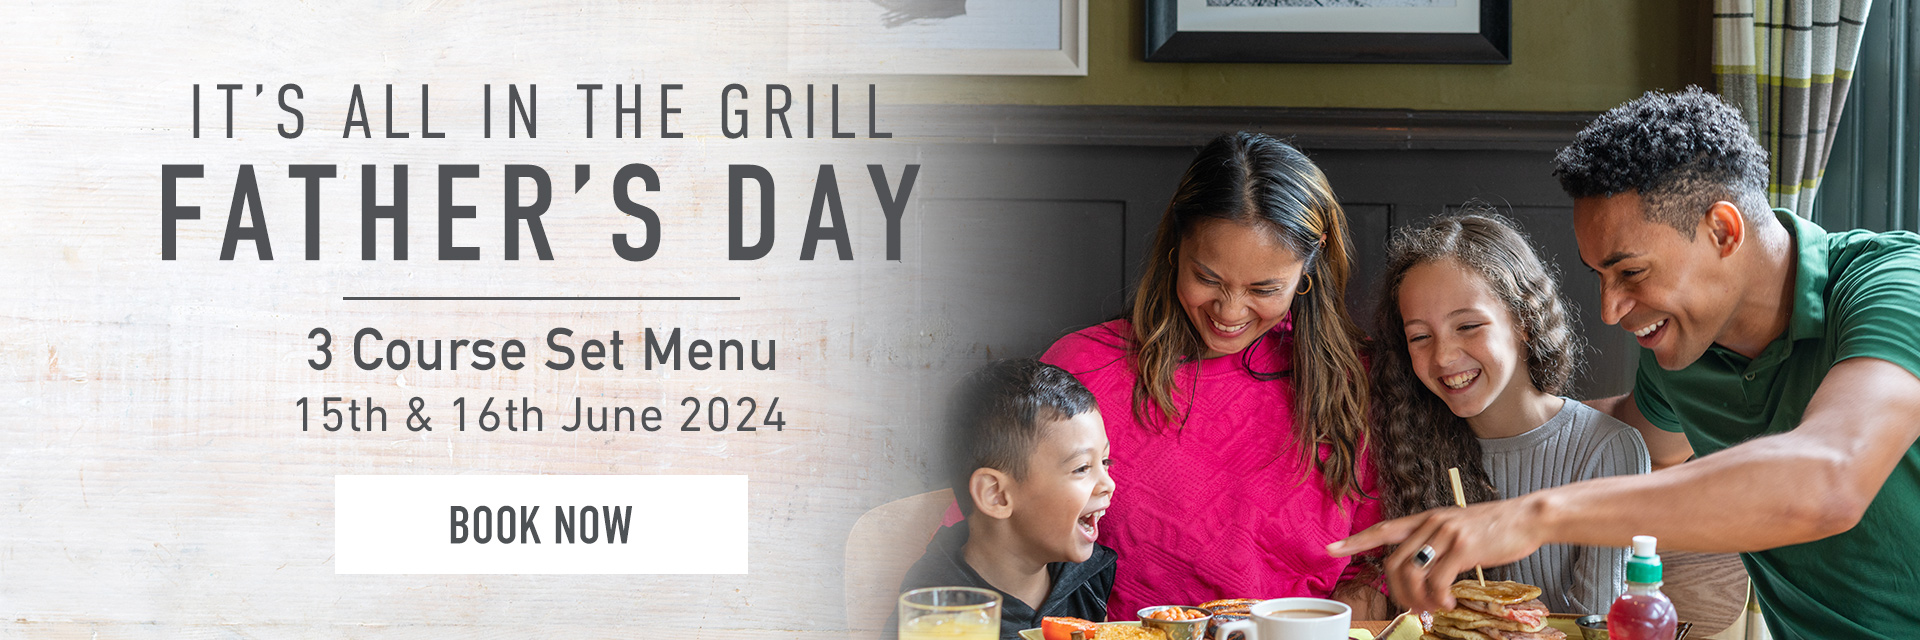 Father’s Day at Harvester The Fort